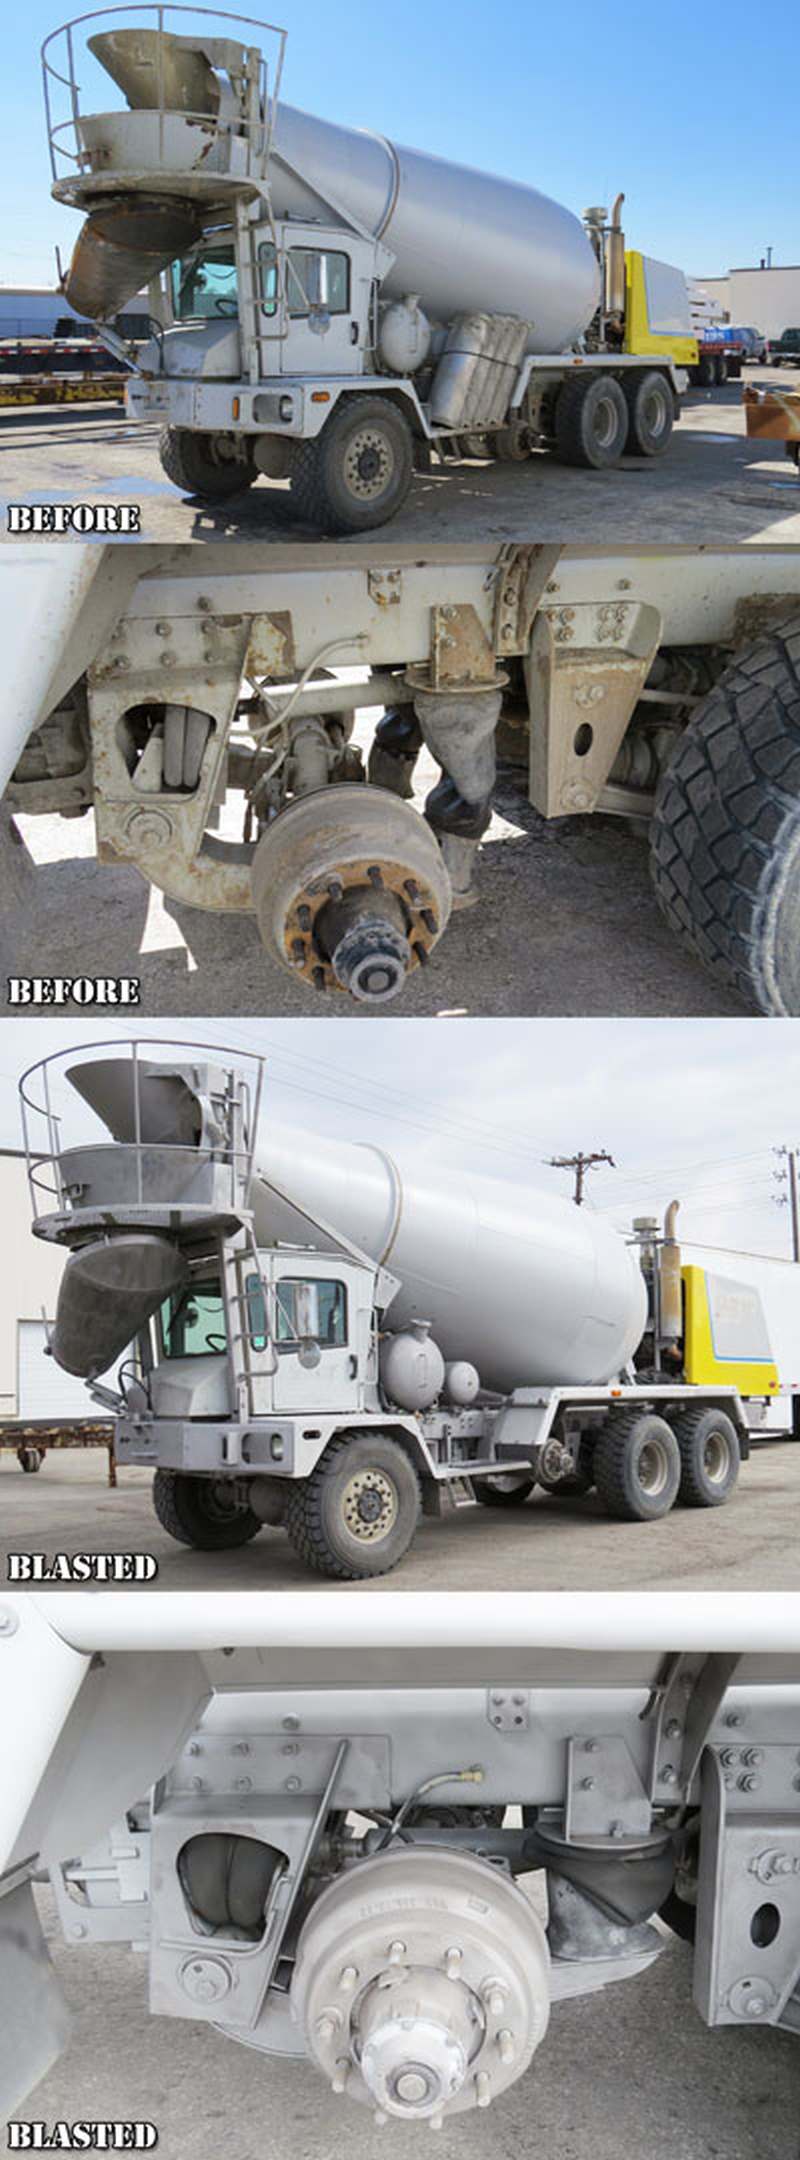 Sand blasting heavy equipment cement truck prior to painting.